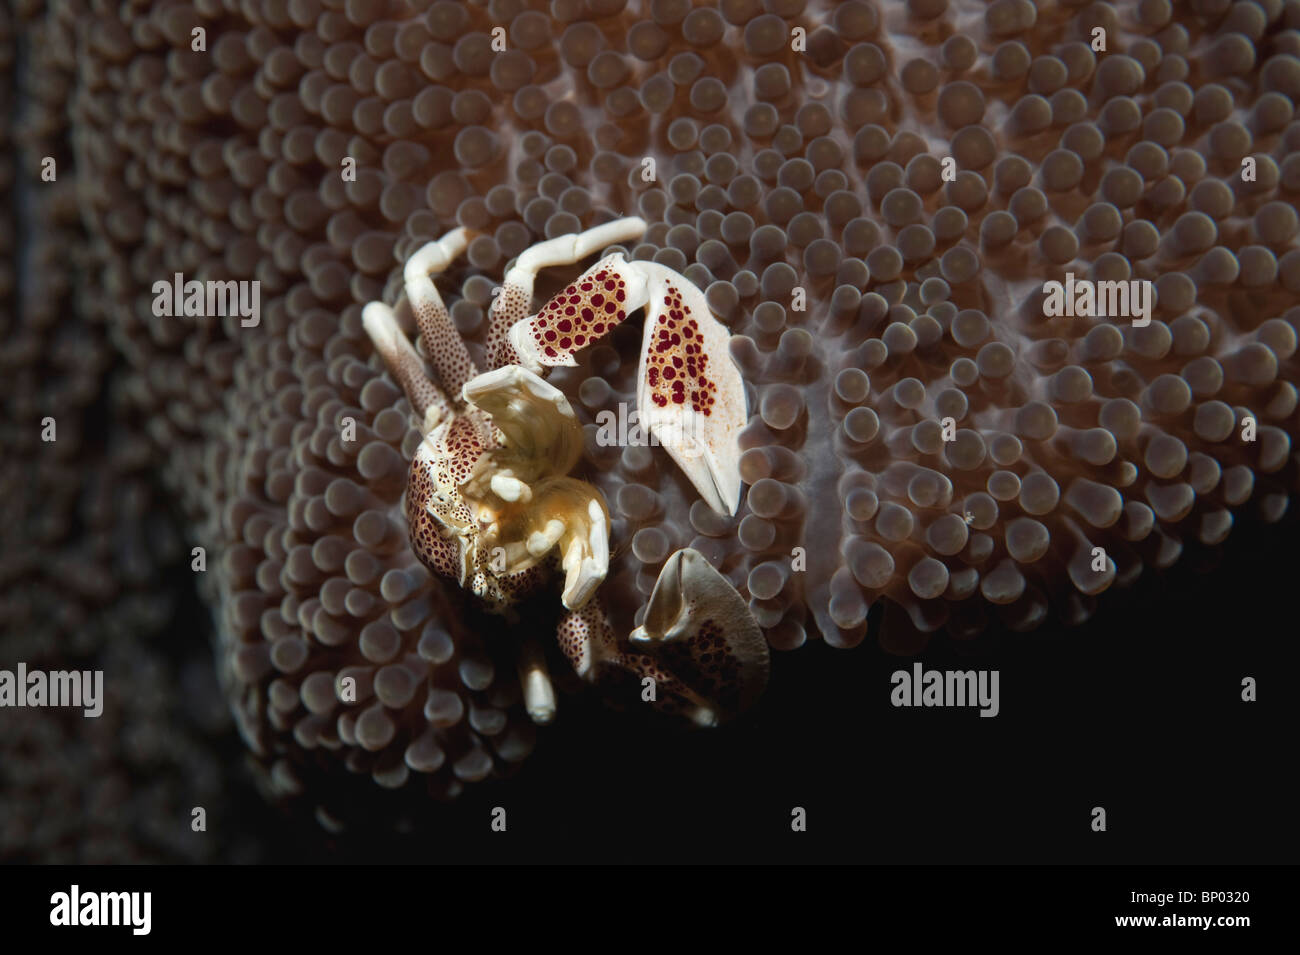 An Anemone Crab filter feeding on an anemone in Indonesia. Stock Photo